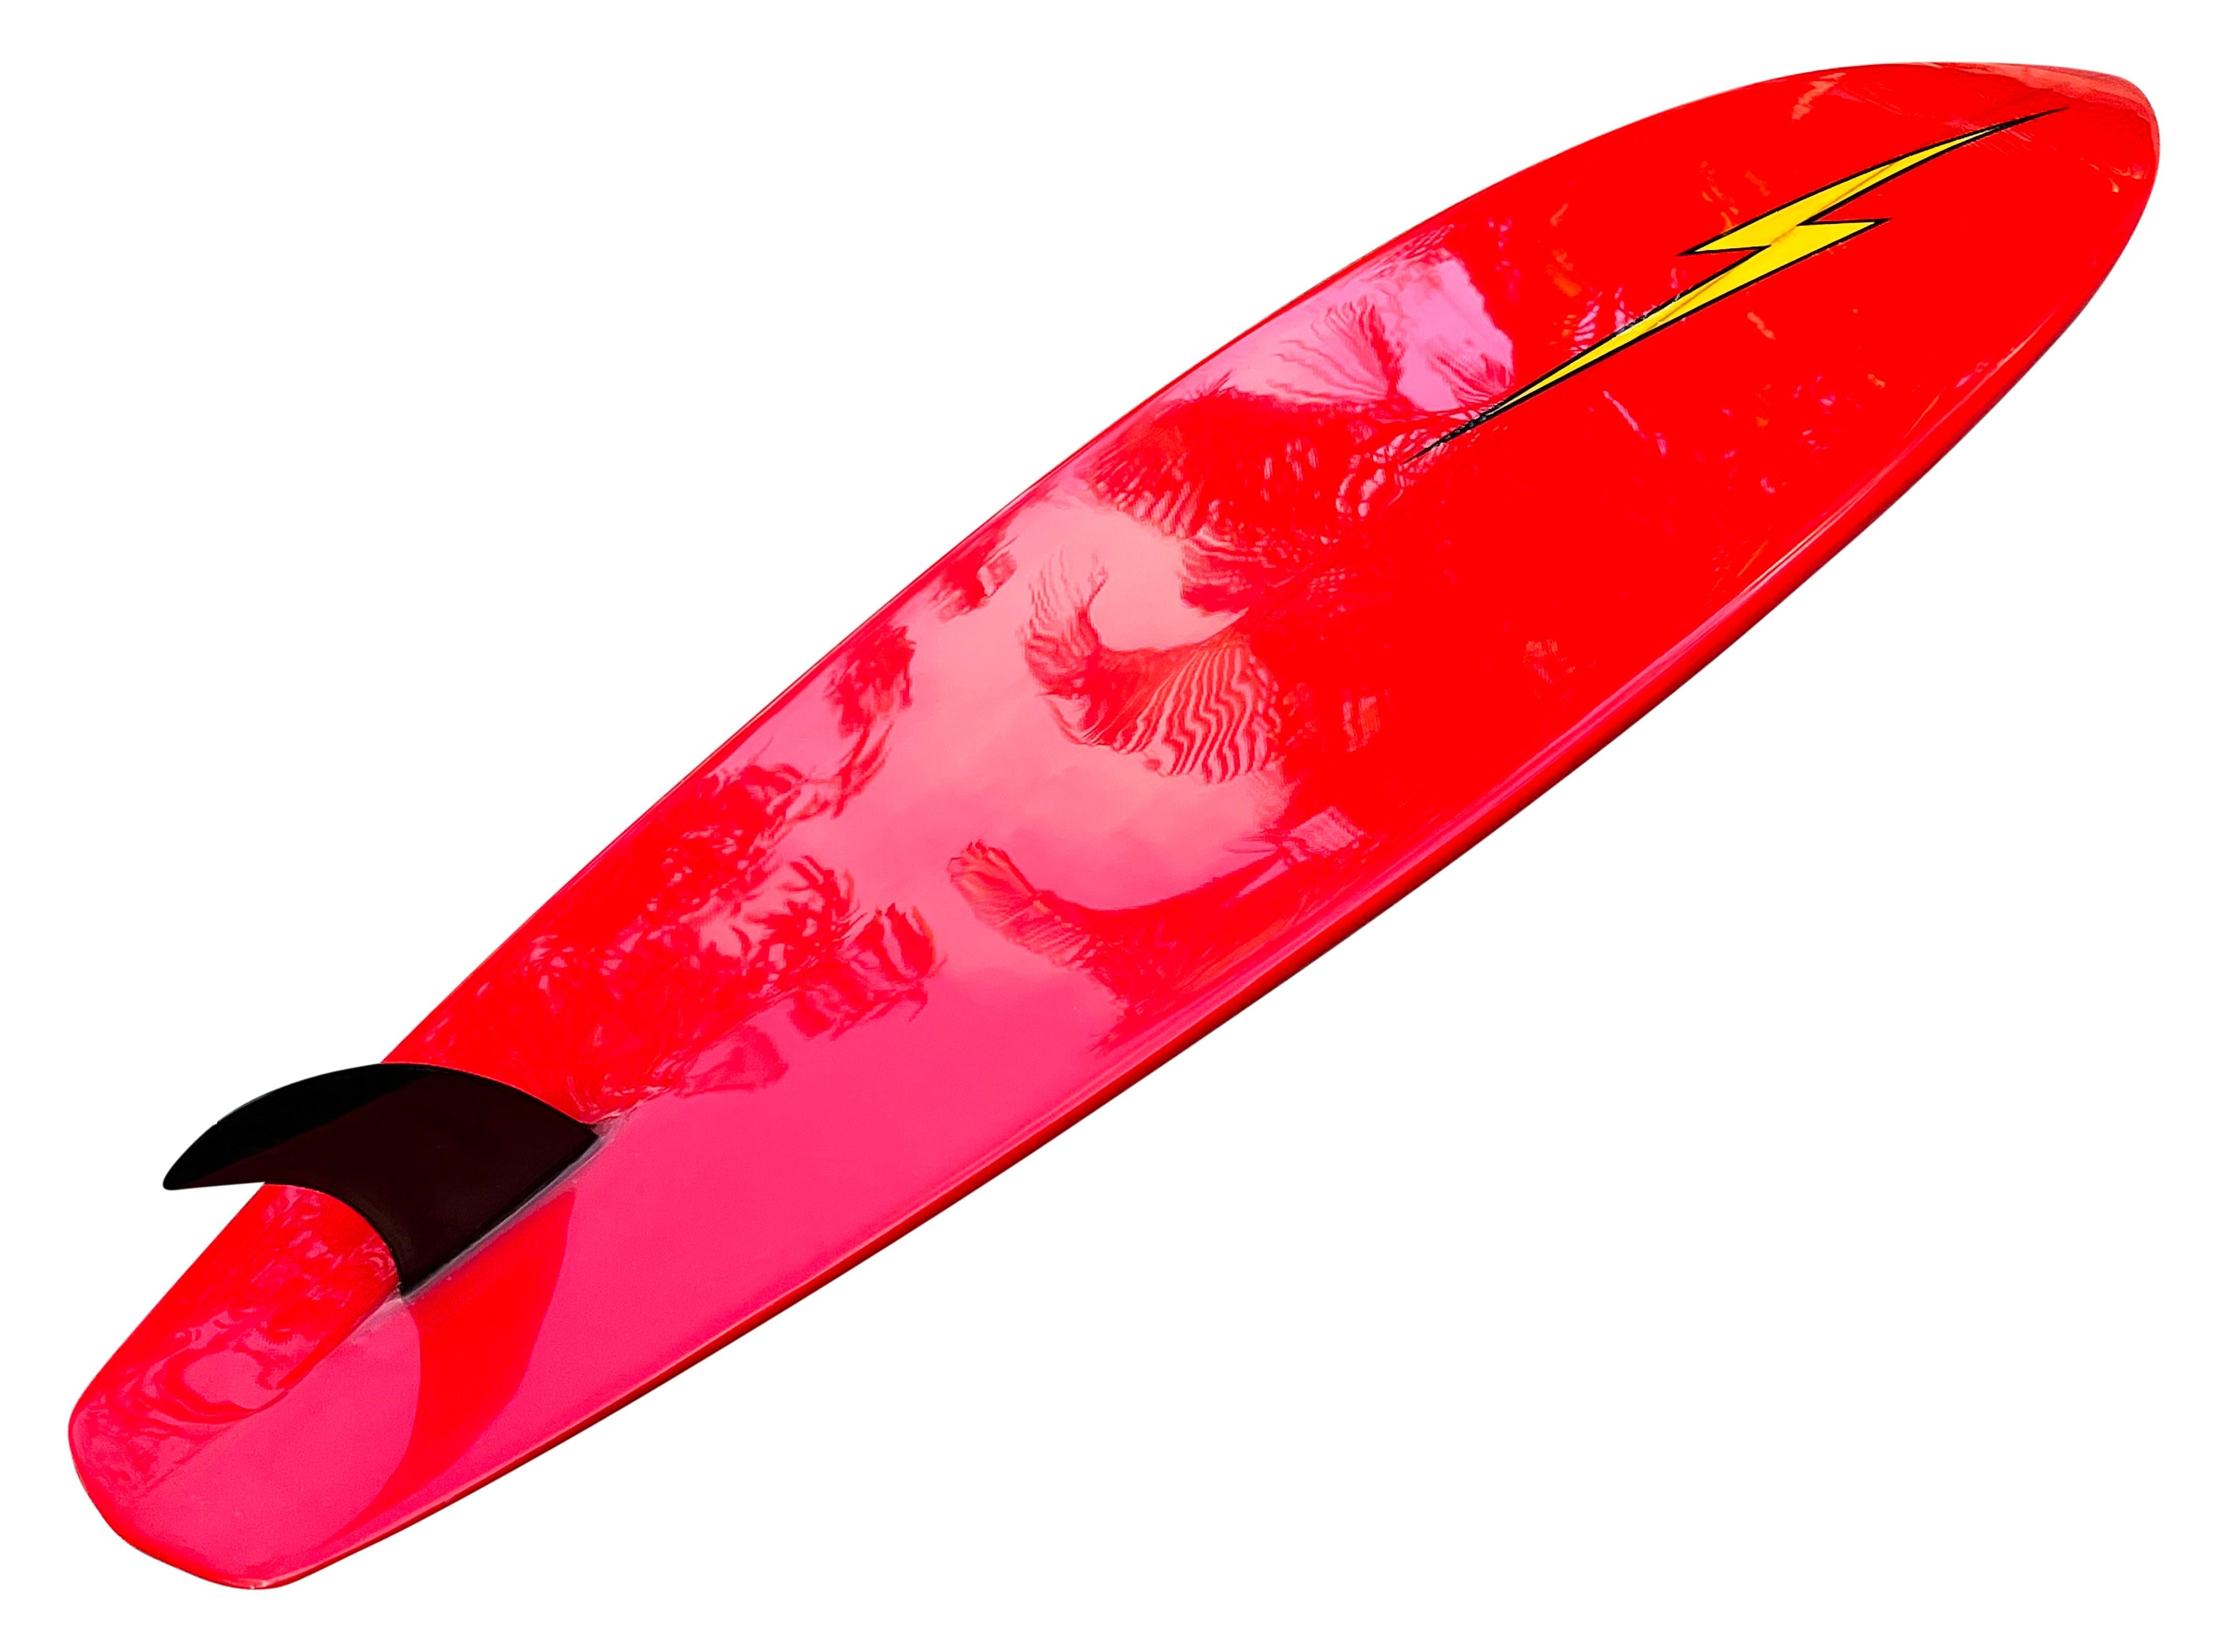 1970s Vintage Lightning Bolt surfboard shaped by Gerry Lopez. Features gorgeous red tint and complimentary yellow tint lightning bolts with black outline. Diamond tail shape design with glassed on fin. Hand made by the most revered surfer/board